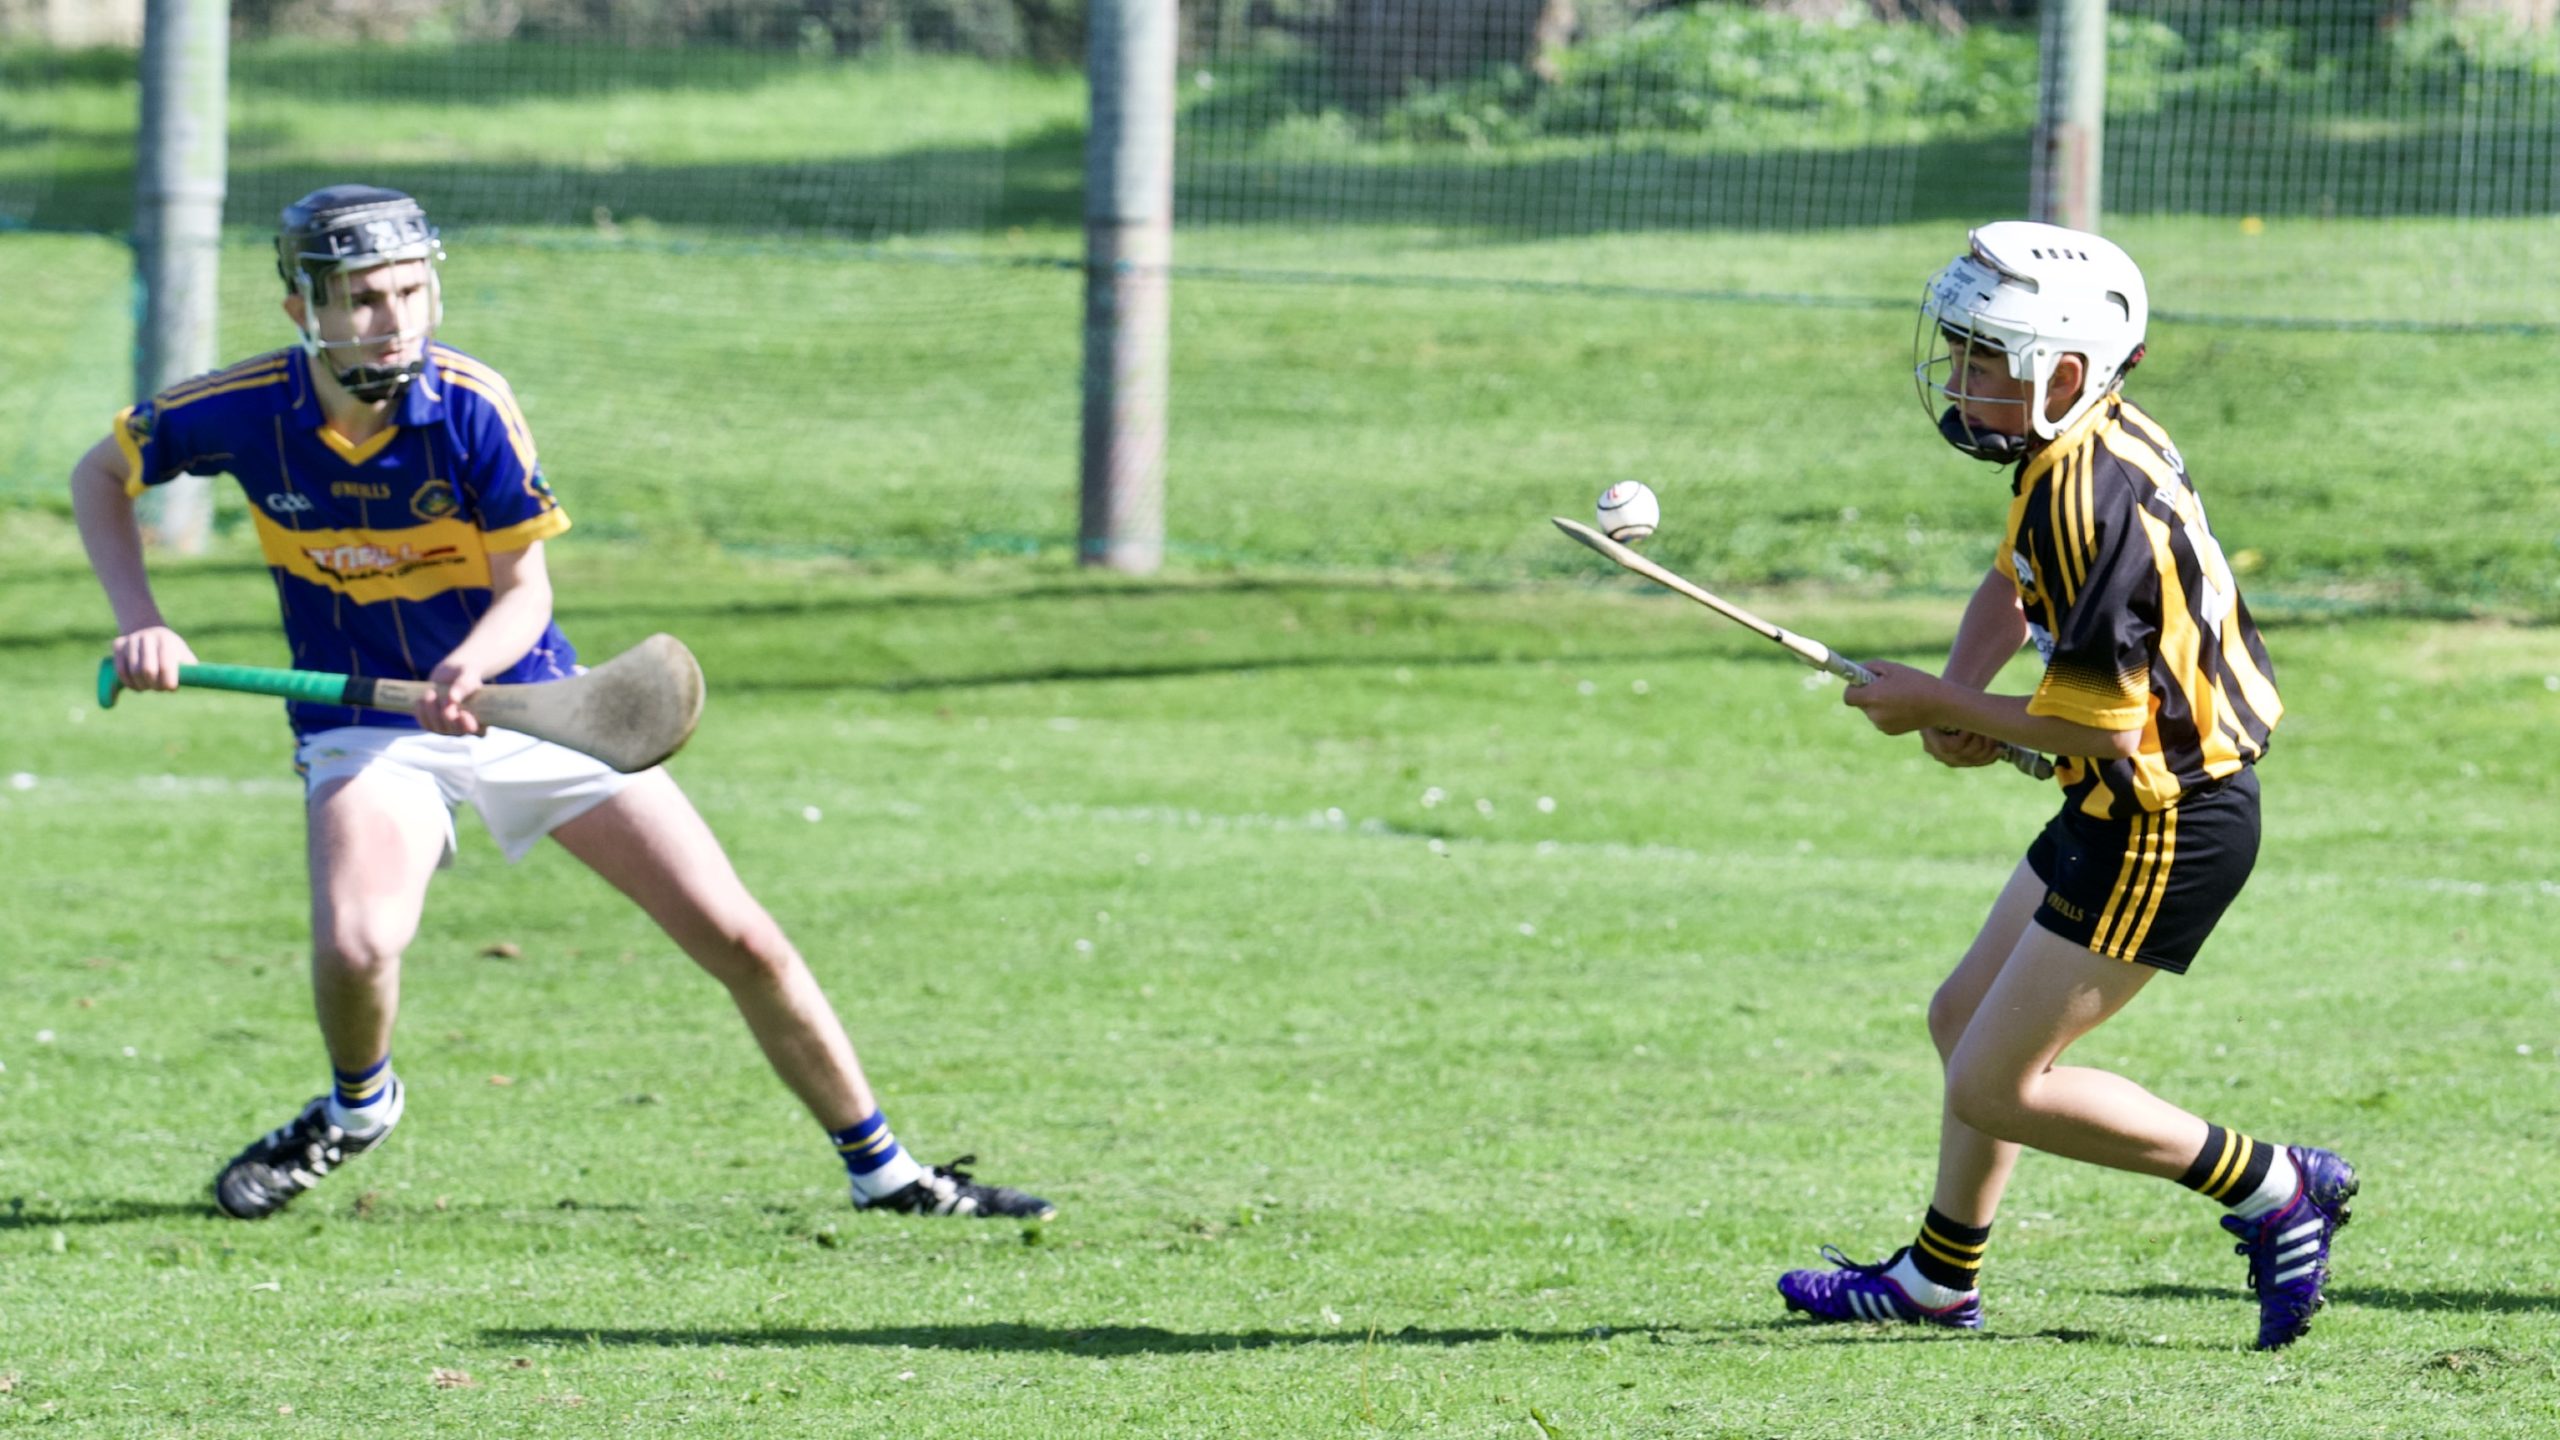 U15 hurlers enjoy their Championship match on a sun drenched St. Patrick’s Park, Portaferry